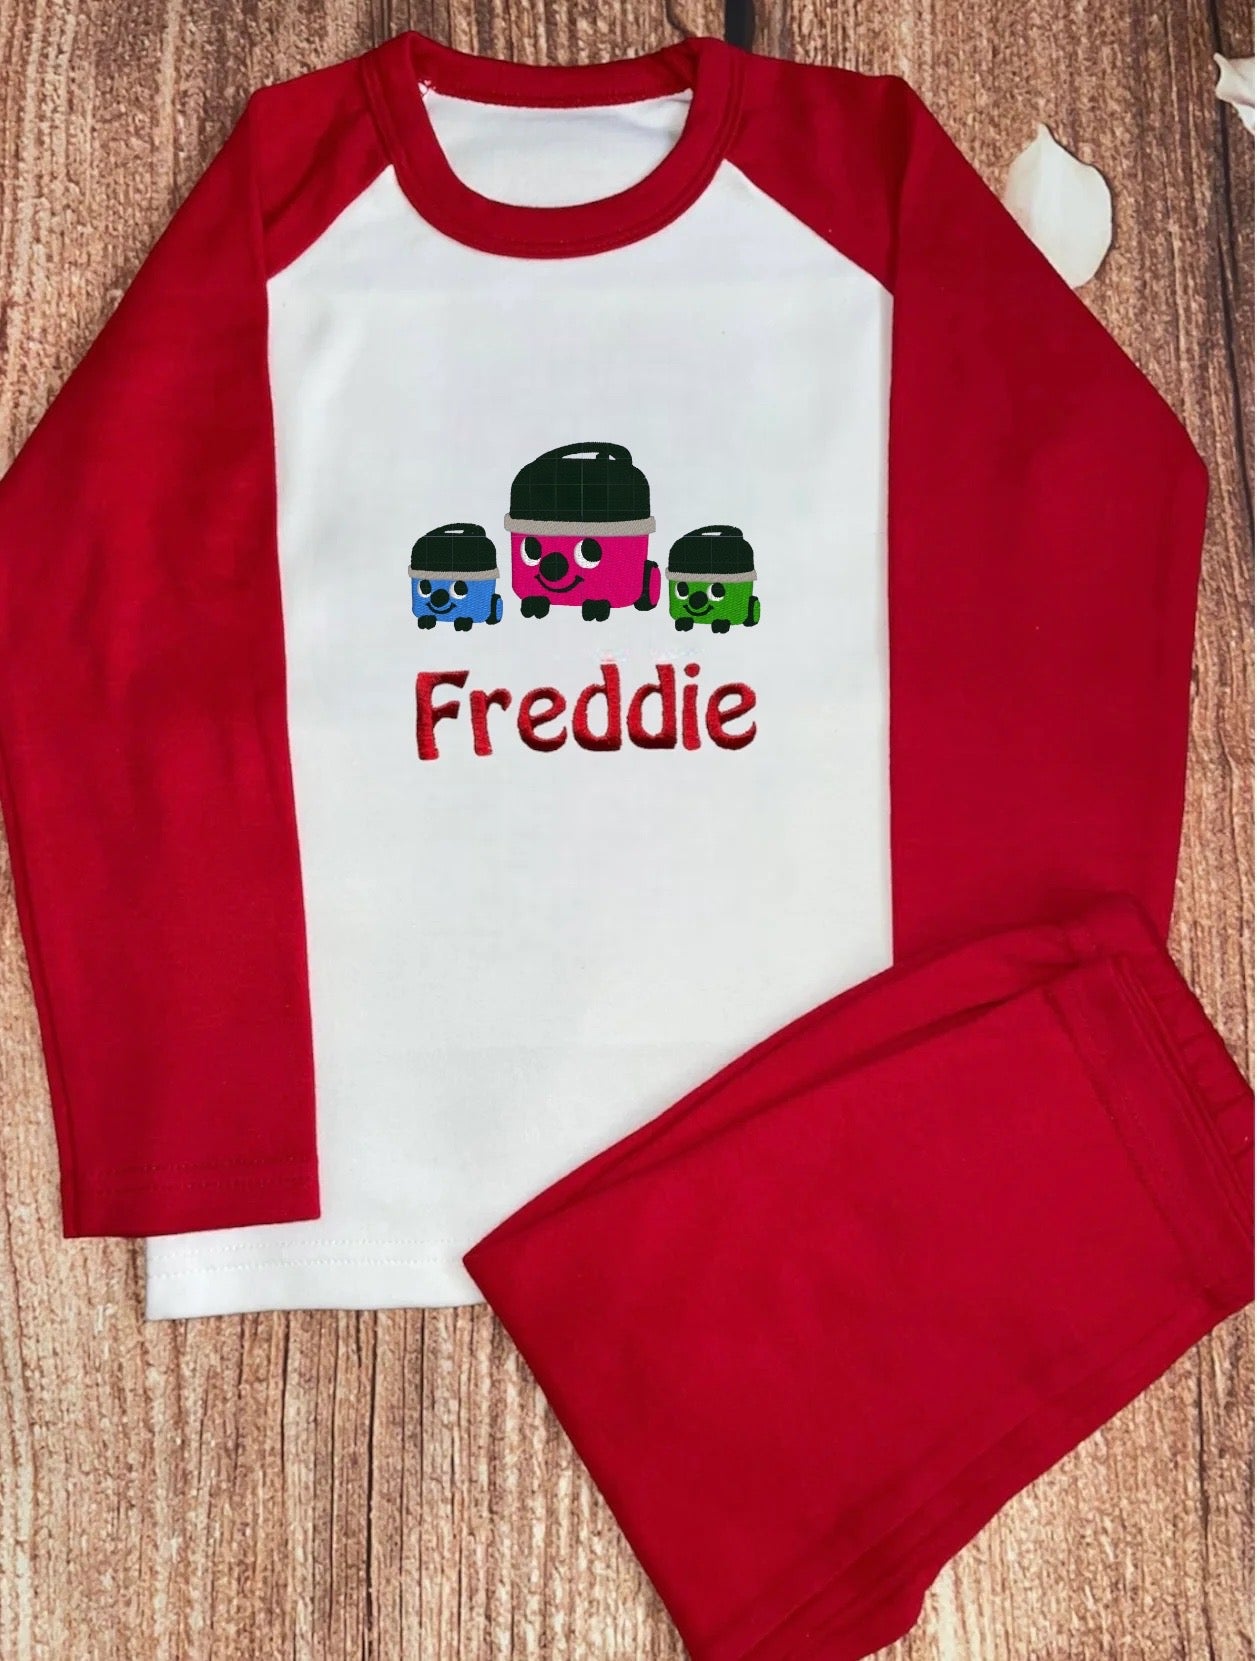 NEW DESIGN Personalised Pyjamas, embroidered with name & Henry hoover & friends design. Gift, keepsake, high quality, soft, PJ's